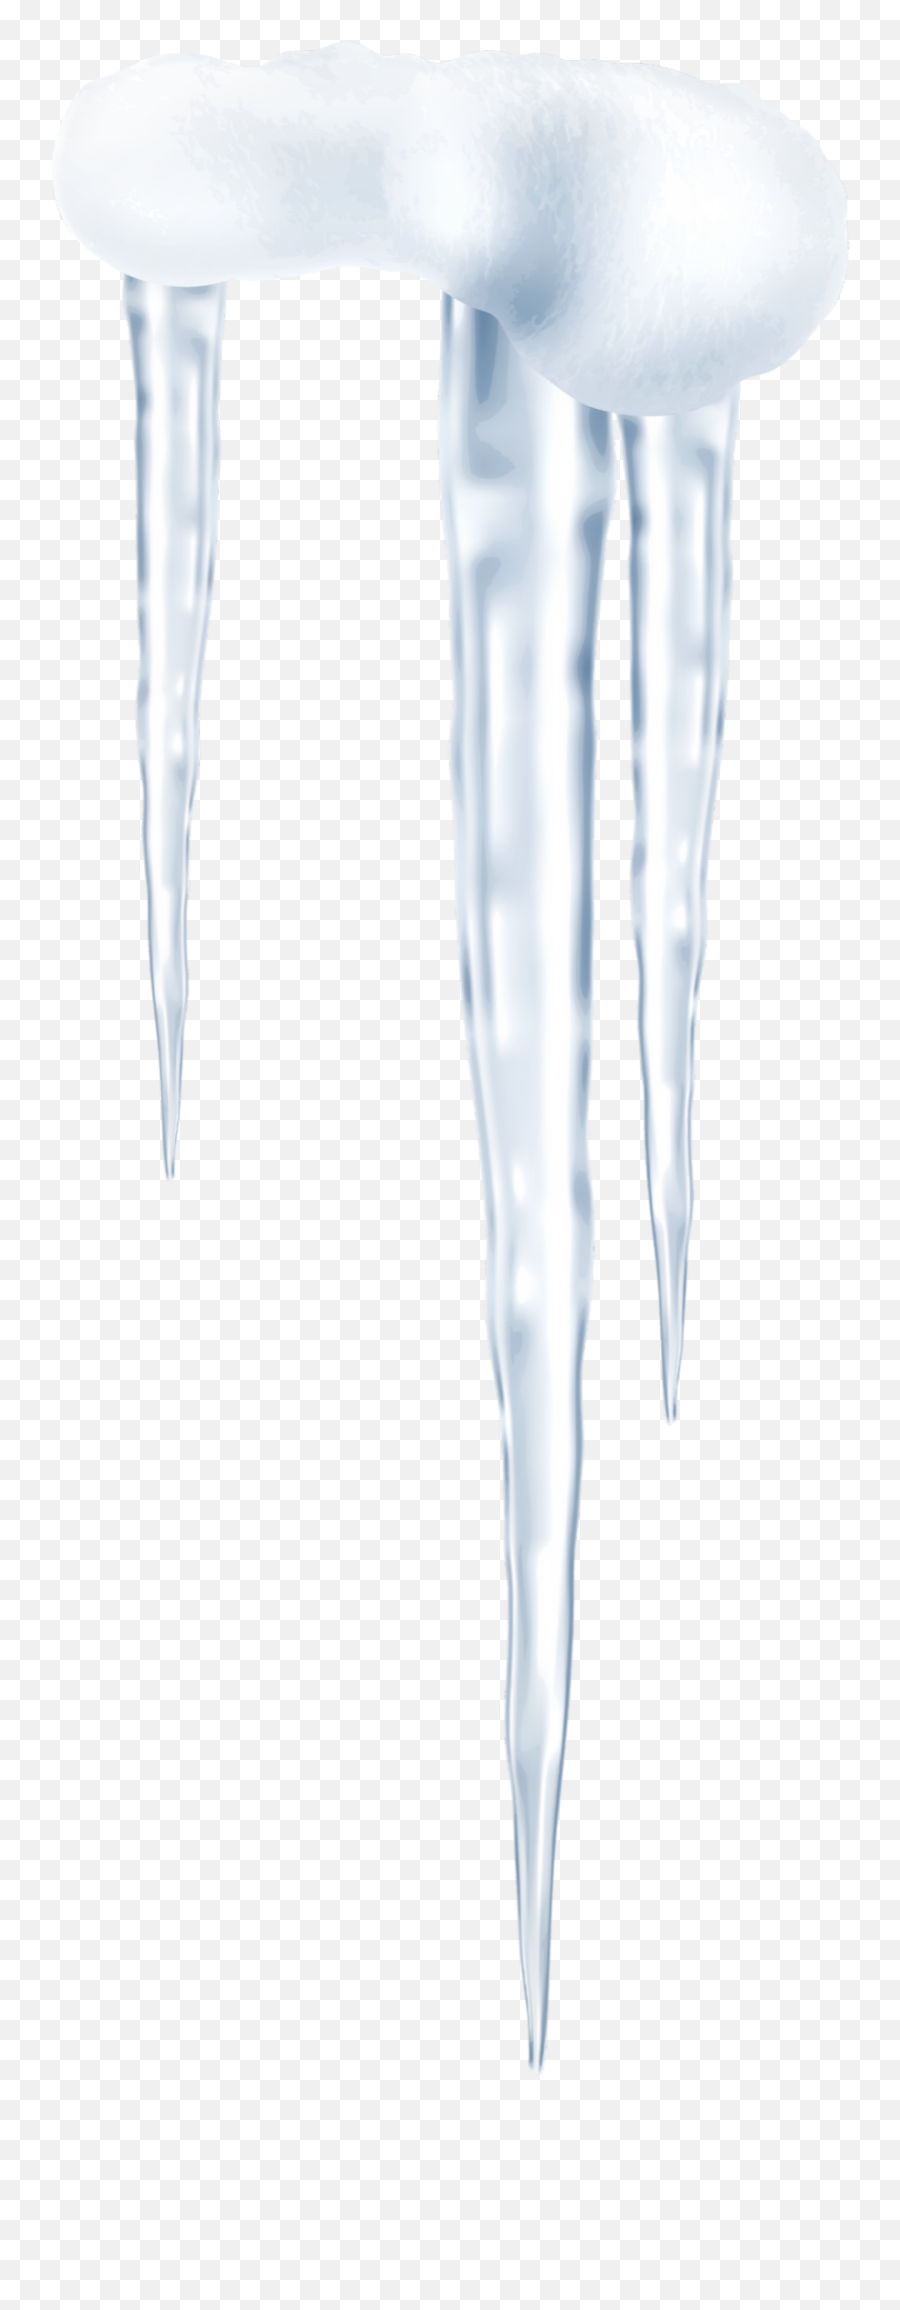 Ftestickers Winter Snow Ice Icicles - Icicle Emoji,Icicle Emoji